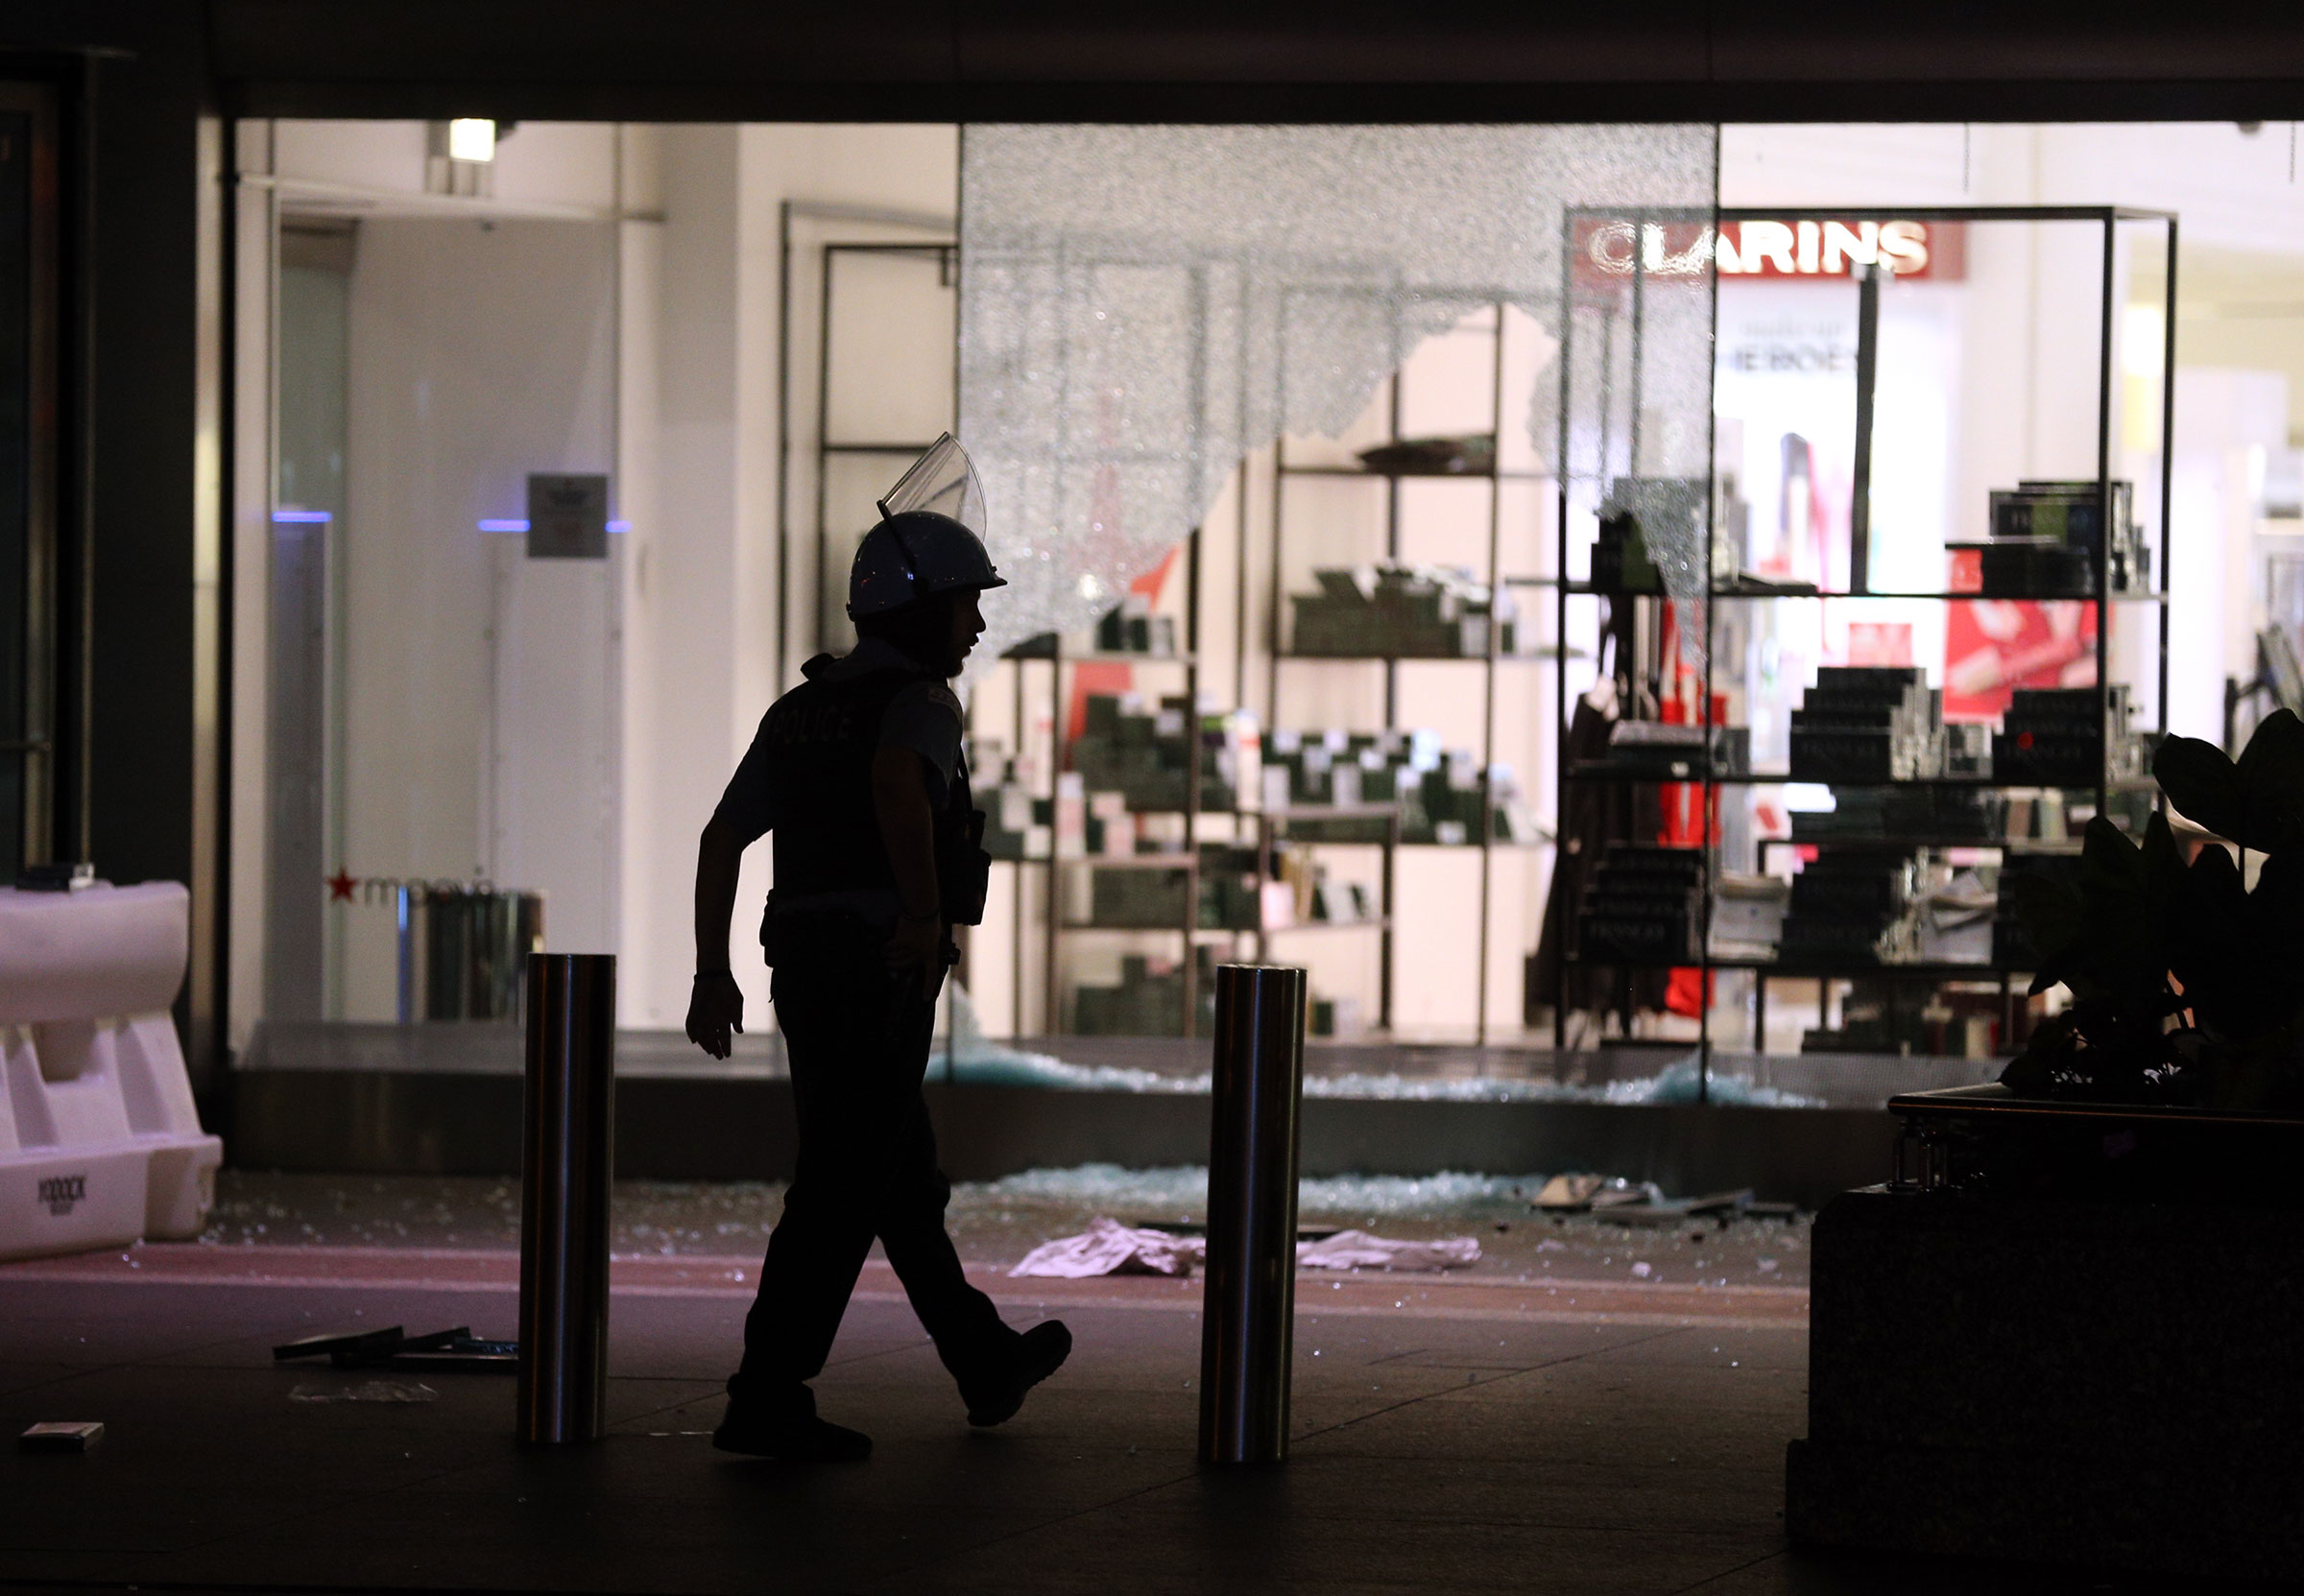 A Chicago Police officer walks past Macy's on North Michigan Avenue in Chicago after the store and others in the area were looted early Monday Aug. 10, 2020. (Terrence Antonio James—Chicago Tribune/TNS/Sipa)